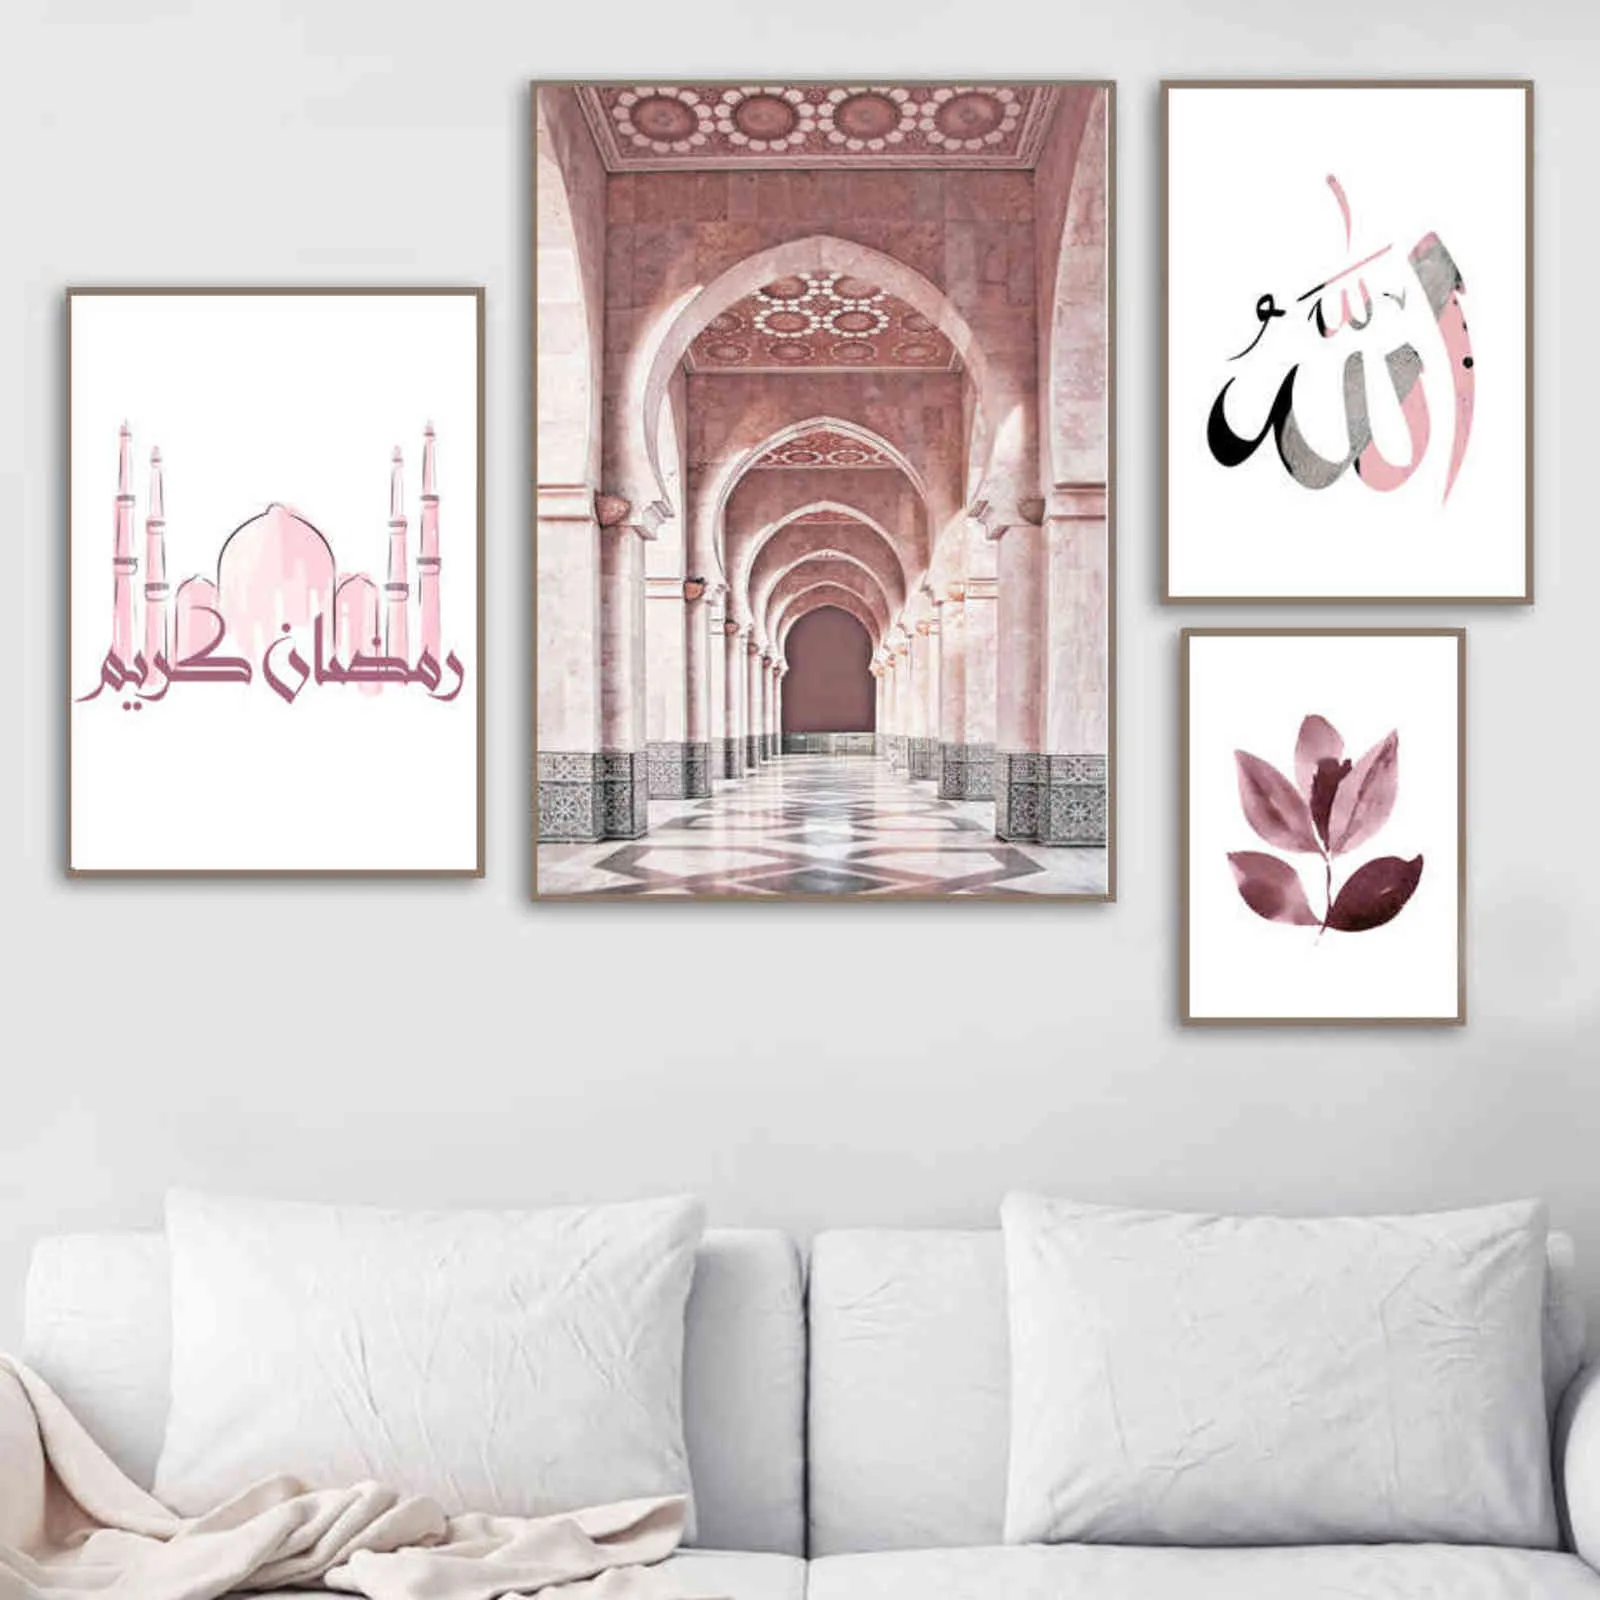 Moroccan Mosque Arabic Calligraphy Islamic Poster Wall Art Print Canvas Painting Nordic Wall Pictures For Living Room Decoration H1110